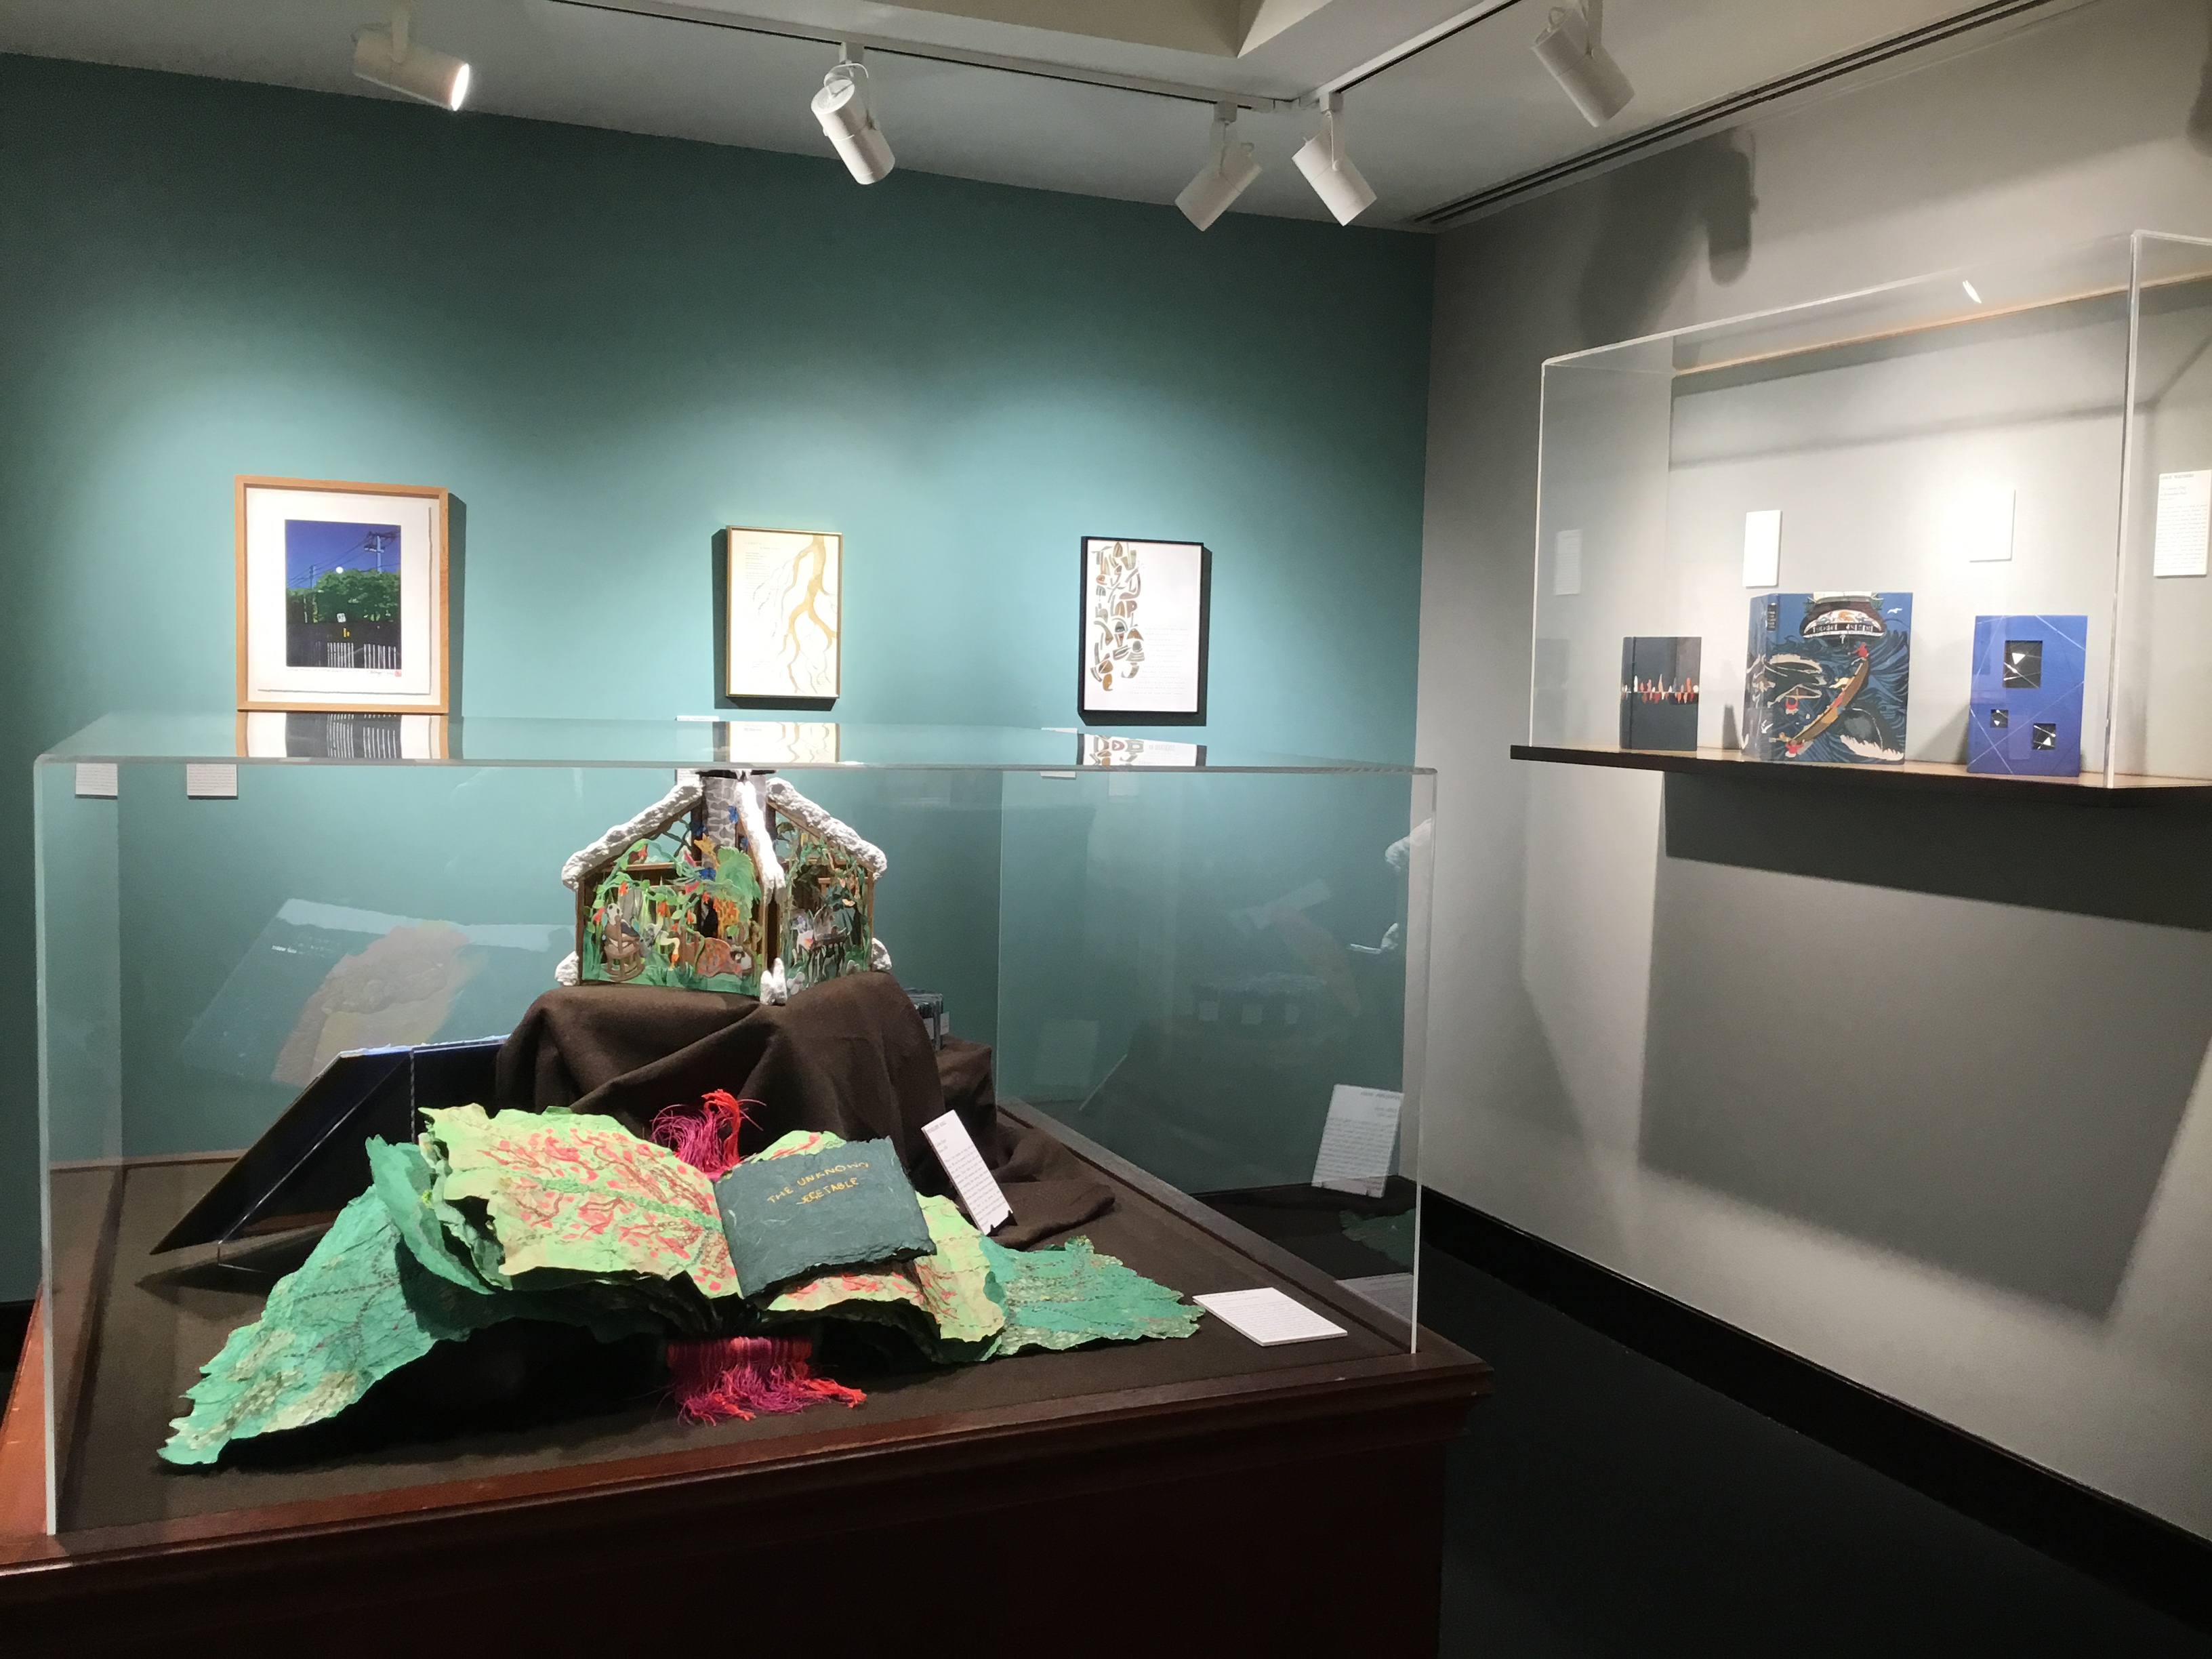 View of the small gallery featuring a large floor case with greenish handmade books inside.  Three framed works of art are displayed on the far wall behind.  A plexiglass wall case with three blue-colored books hangs to the right.